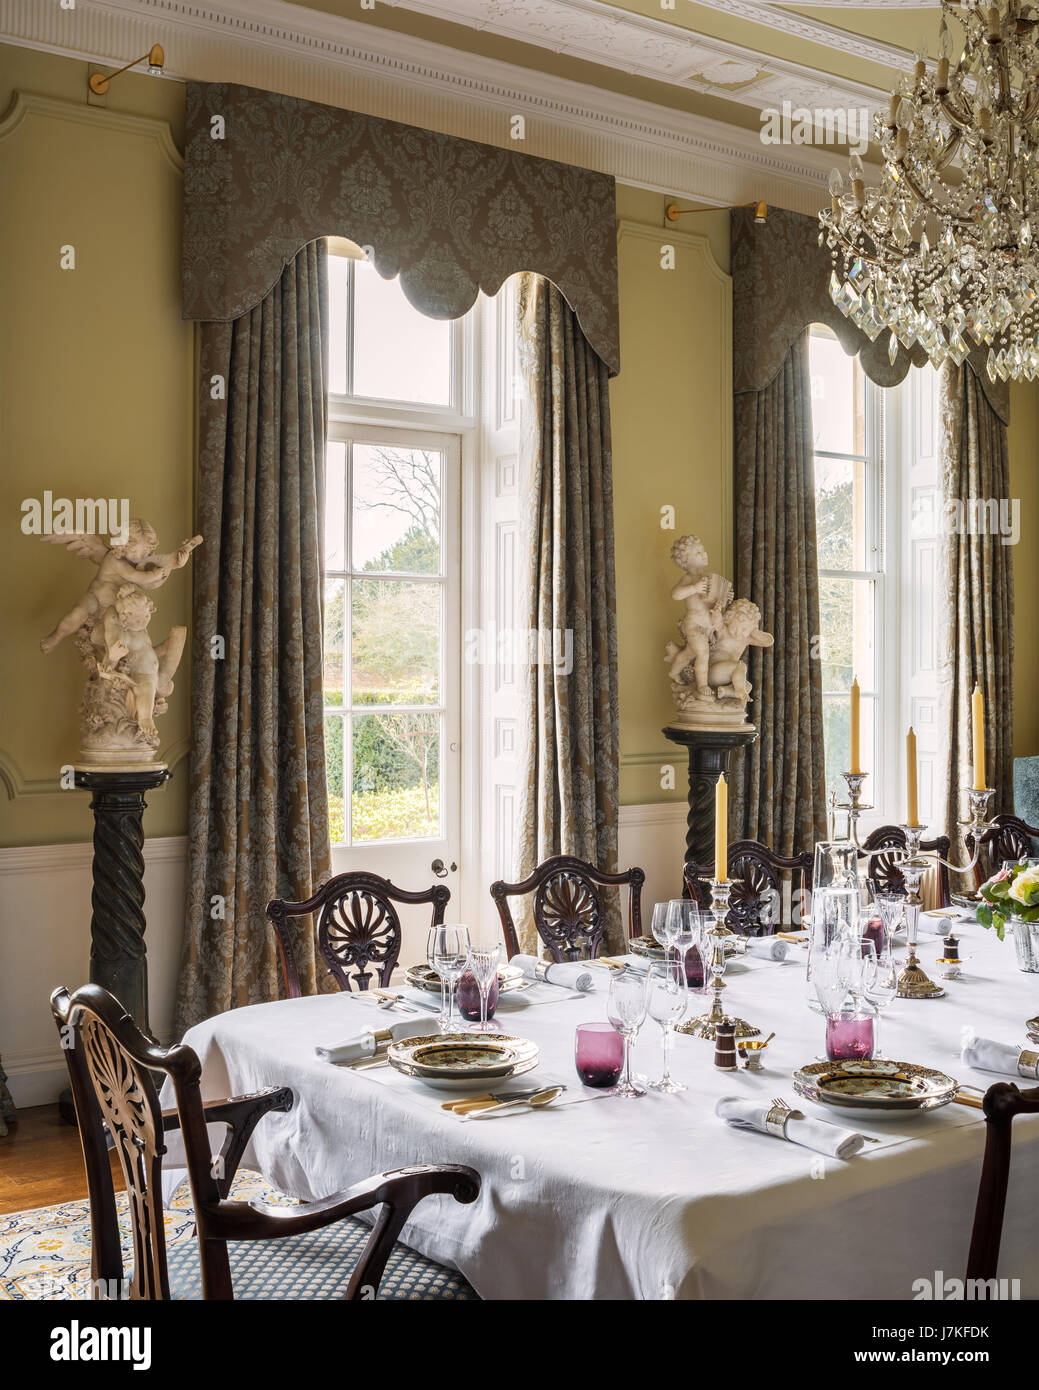 Georgian style dining chairs in grand dining room with glass chandelier marble busts on plinths Stock Photo